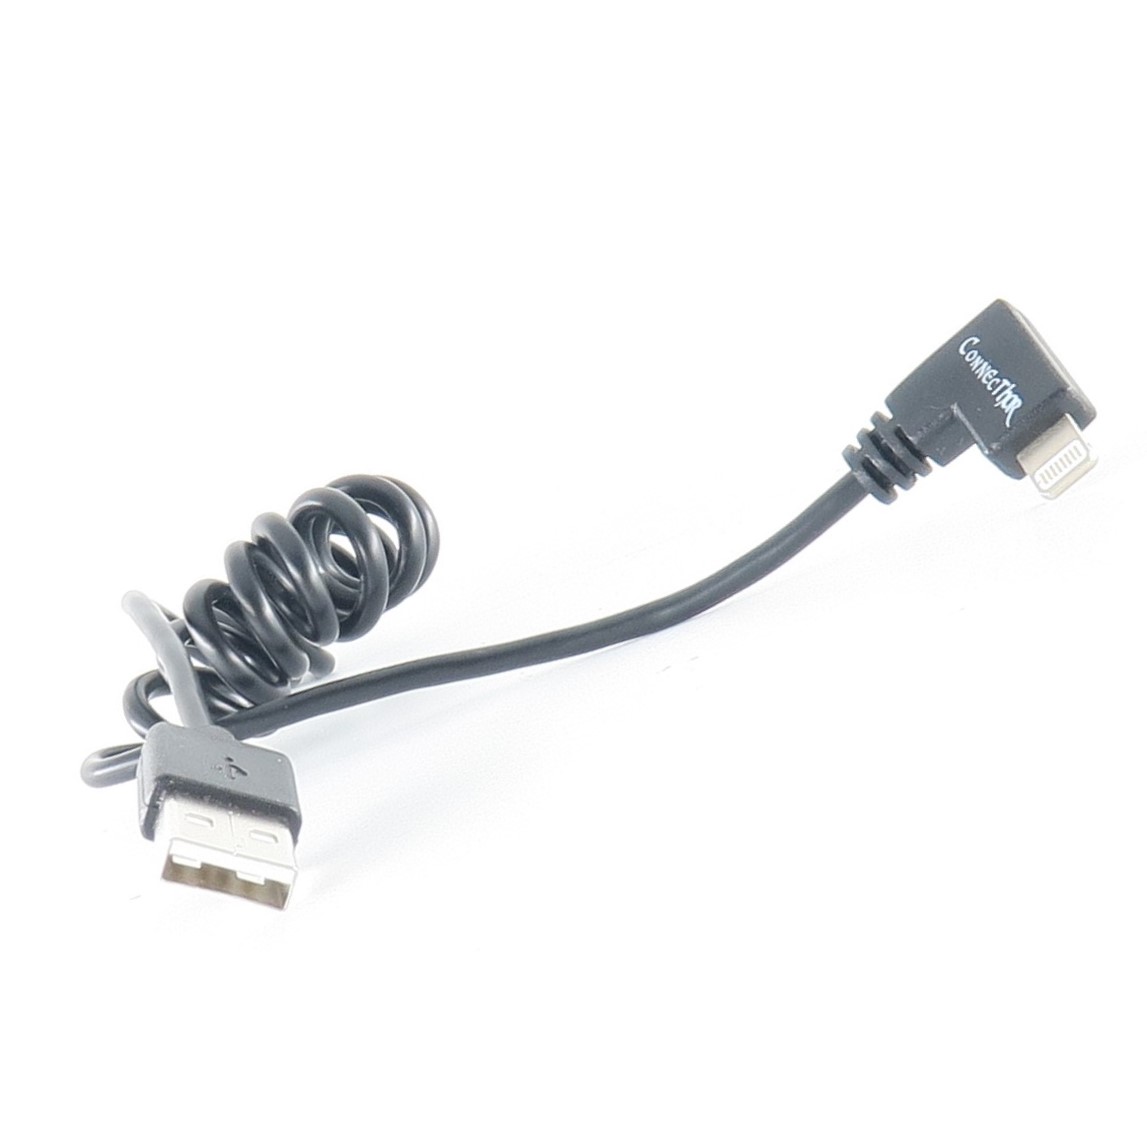 ConnecThor cable - USB 2.0 to lightning for DJI Drones